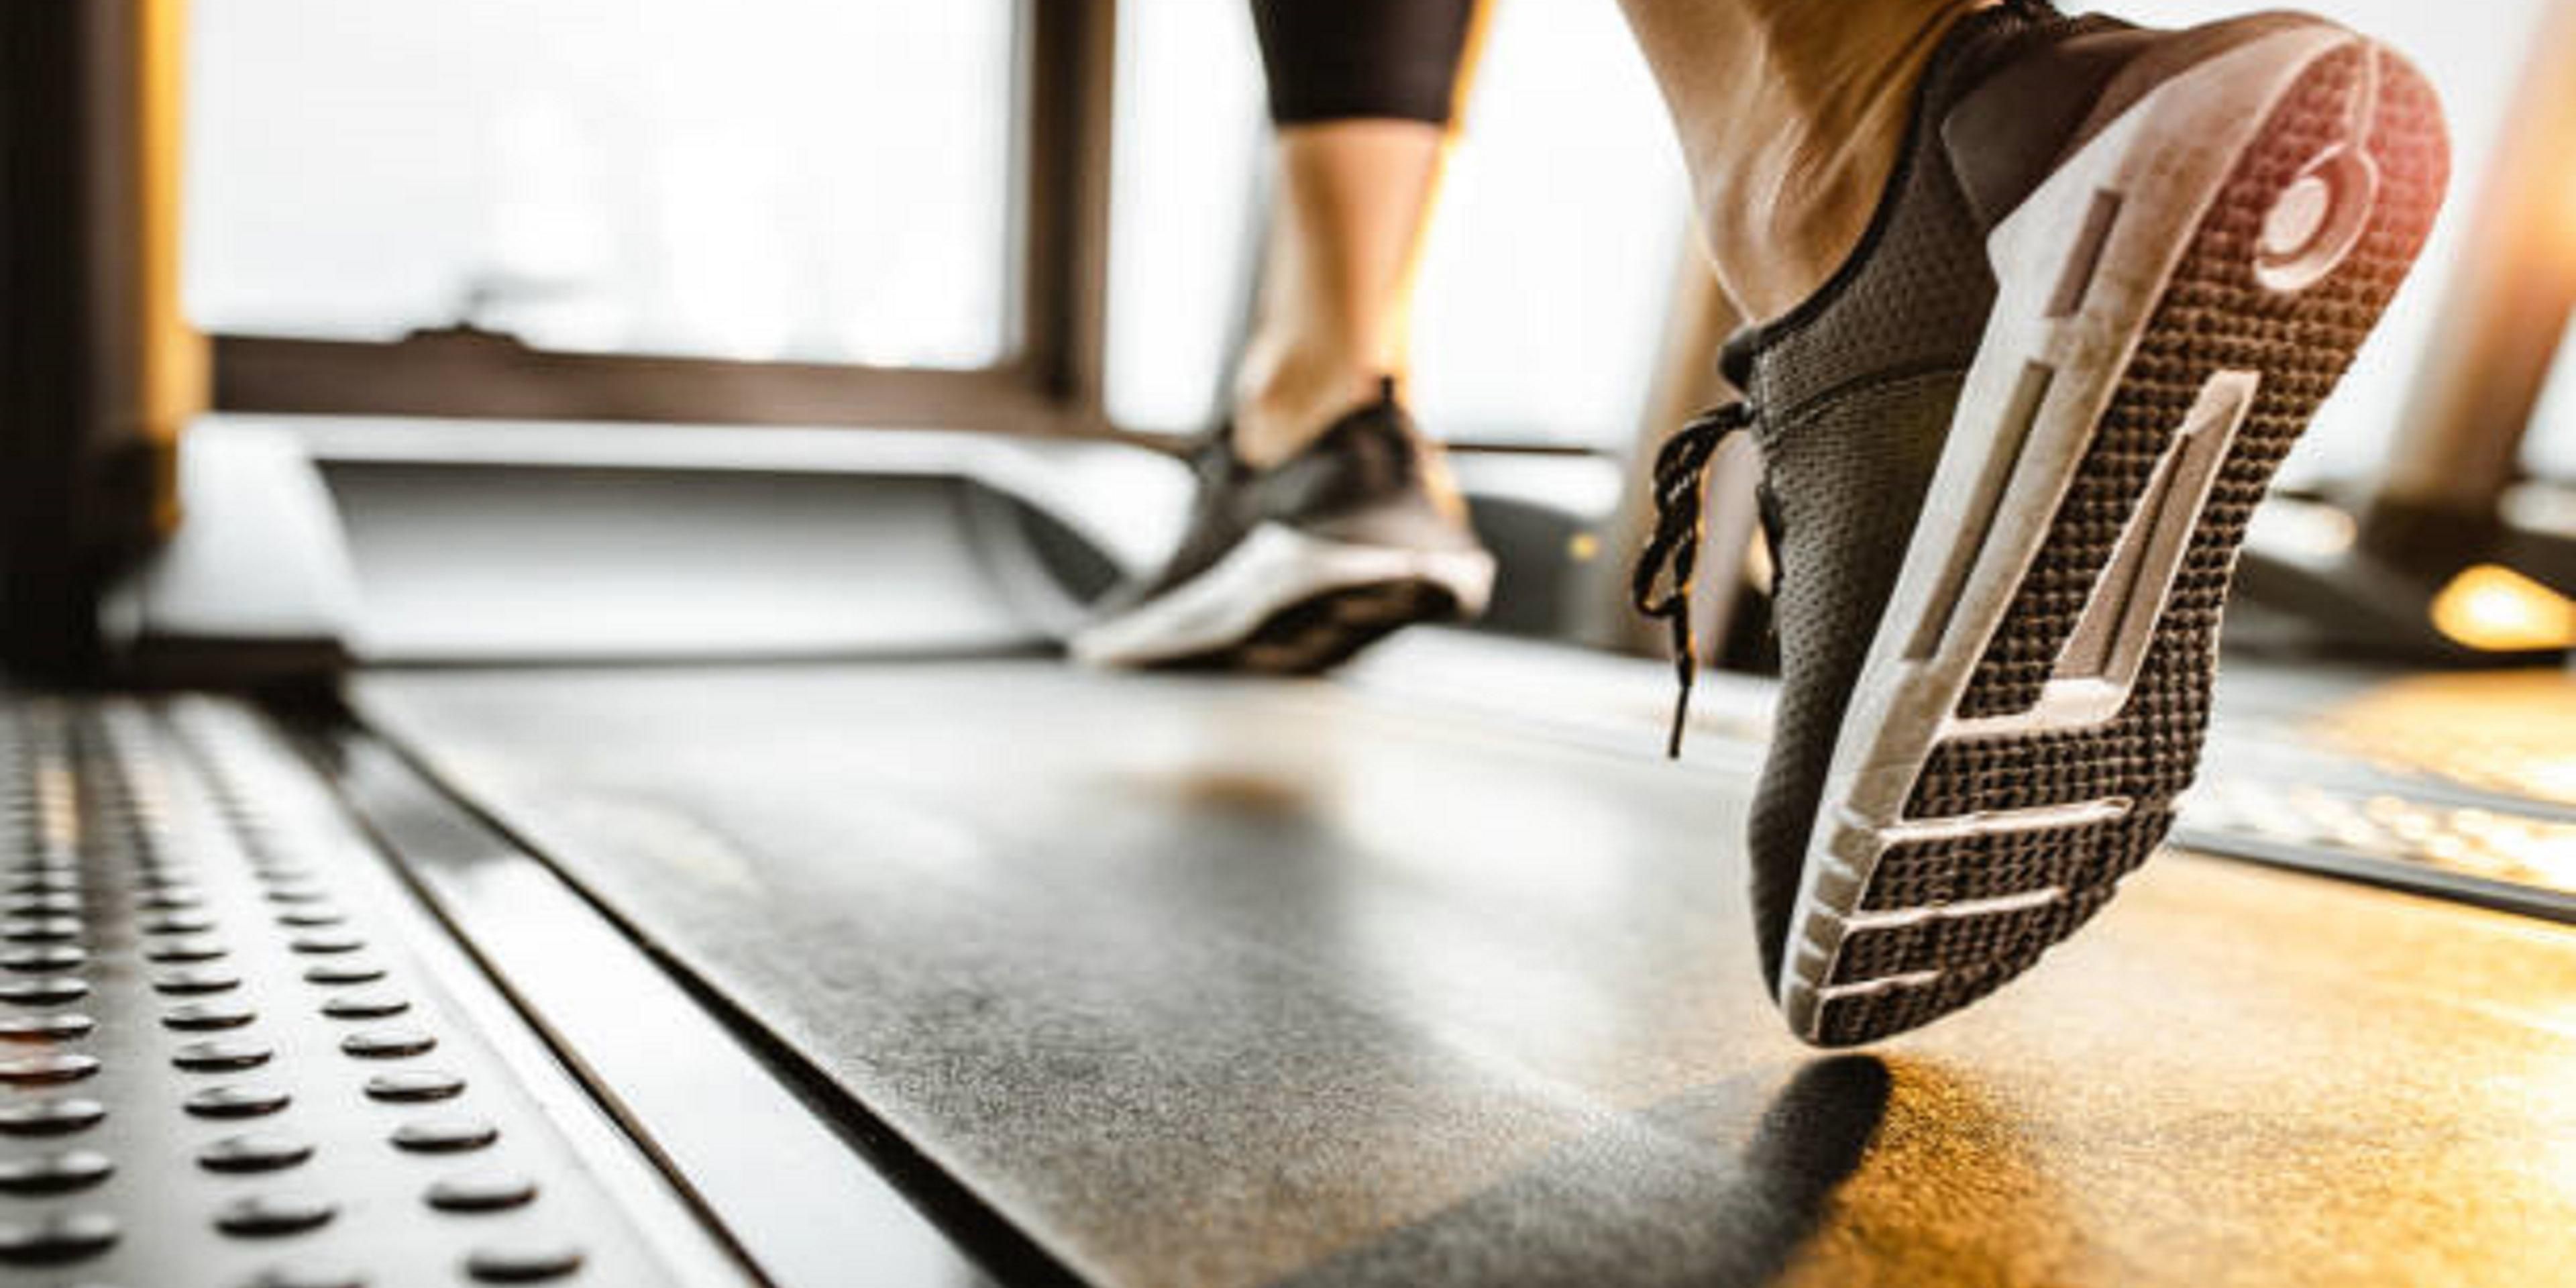 Get your sweat on in our complimentary, fully equipped Fitness Center with treadmills, weights, and elliptical machines. Open 24 hours.